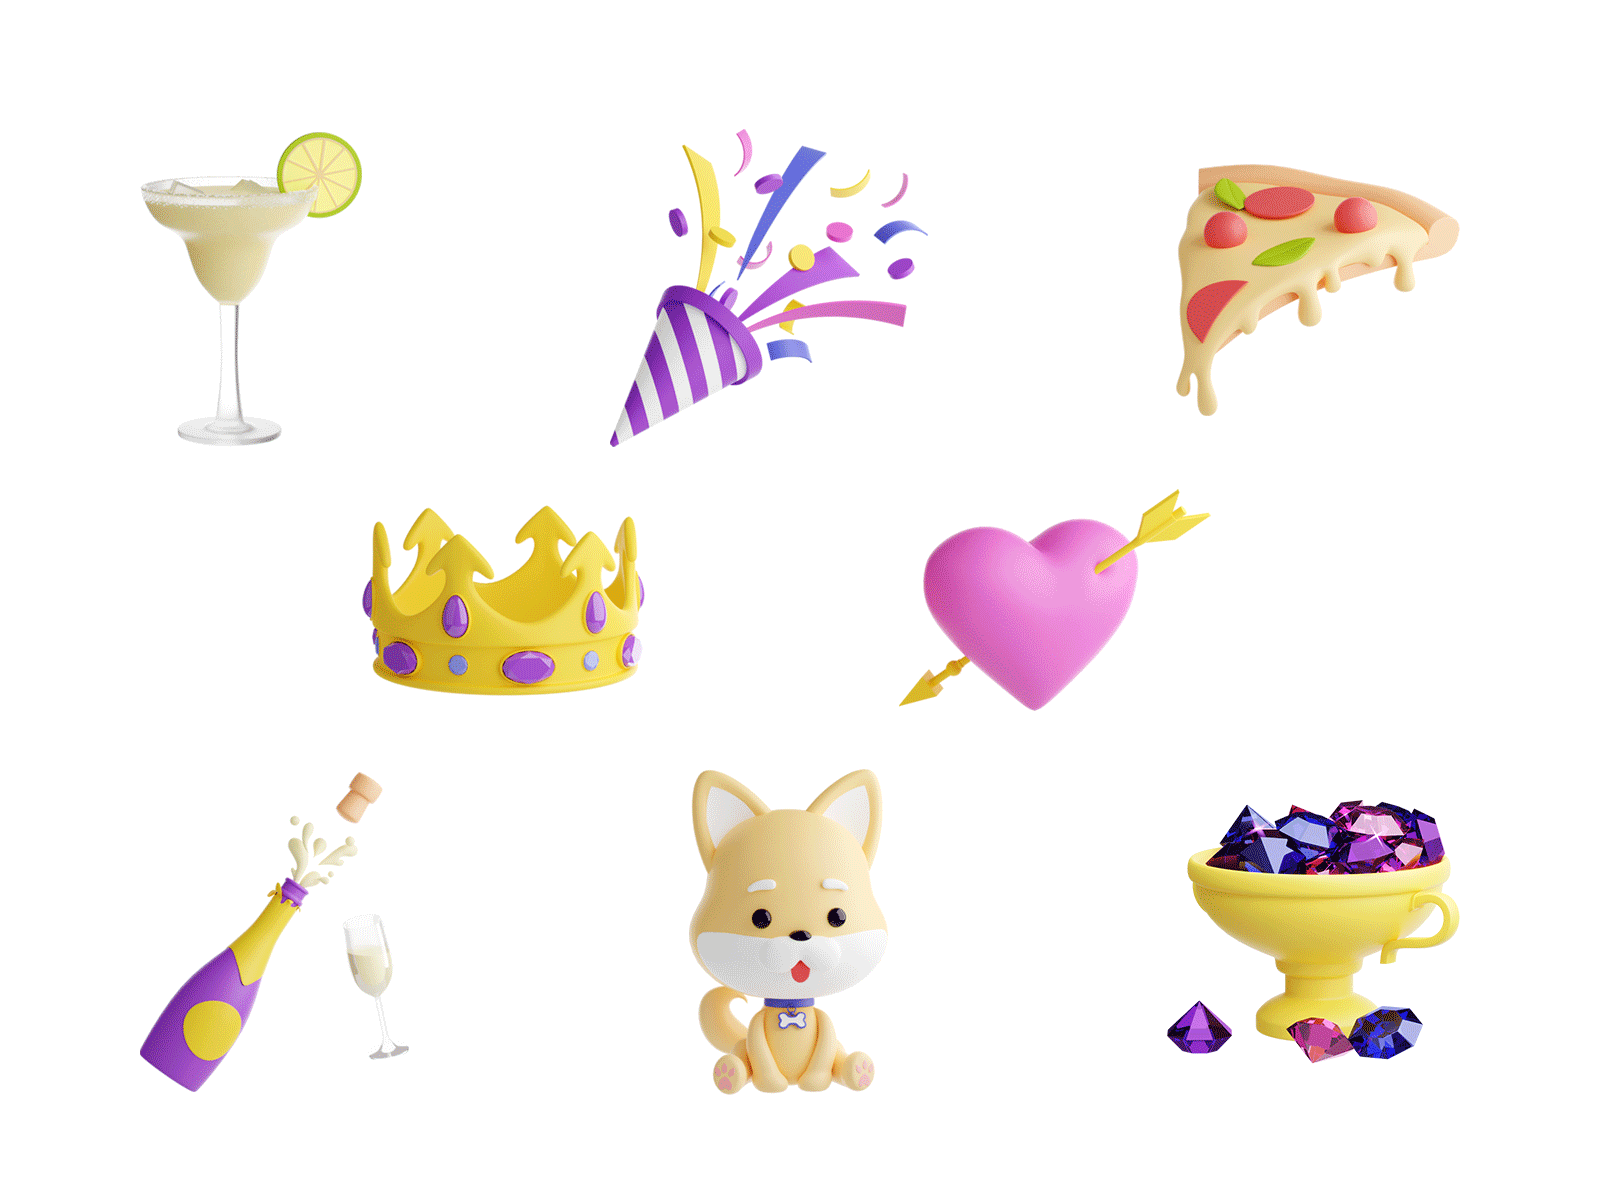 3D illustrations: Gifts collection Vol.2